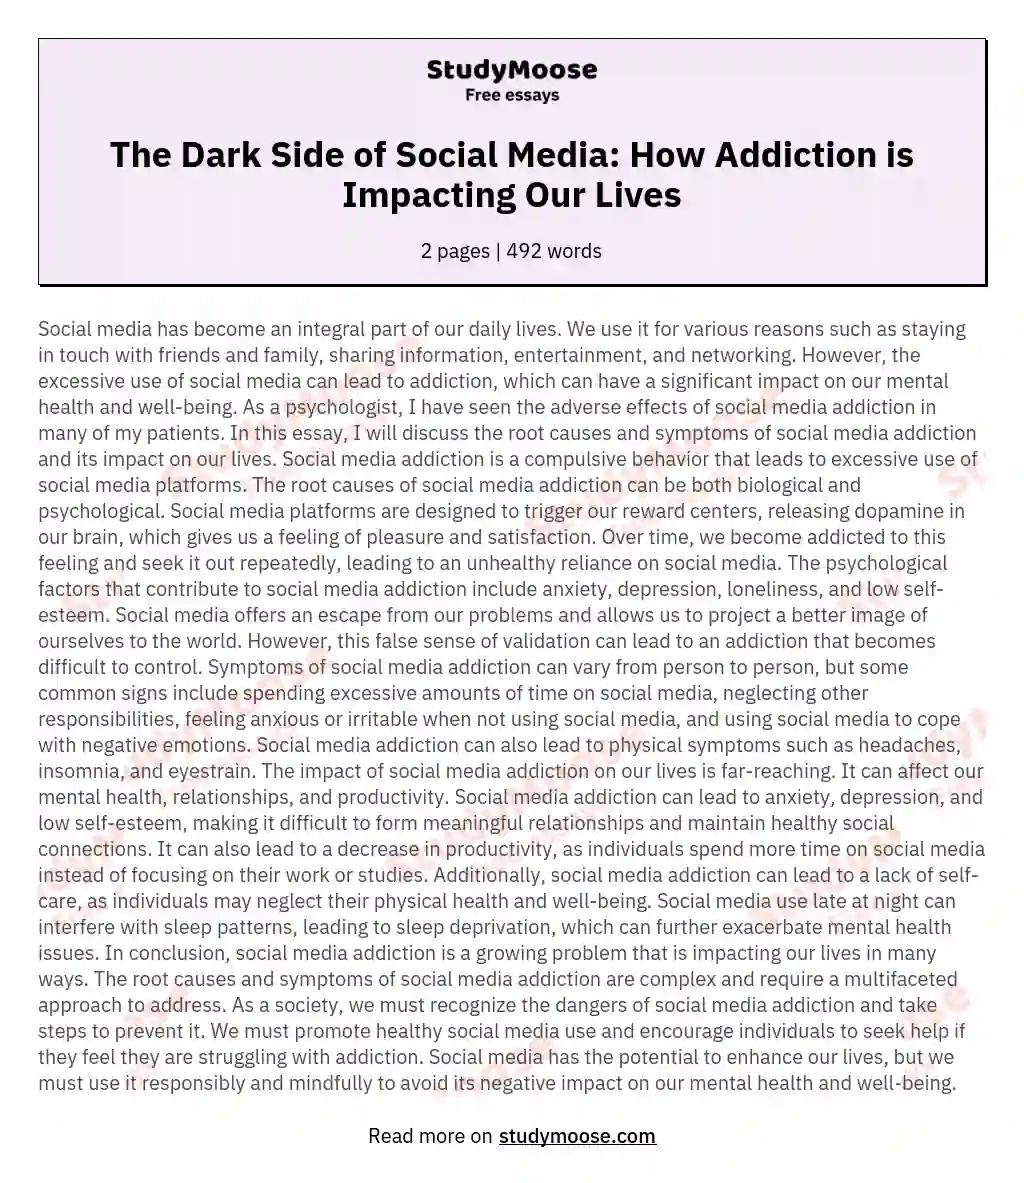 The Dark Side of Social Media: How Addiction is Impacting Our Lives essay